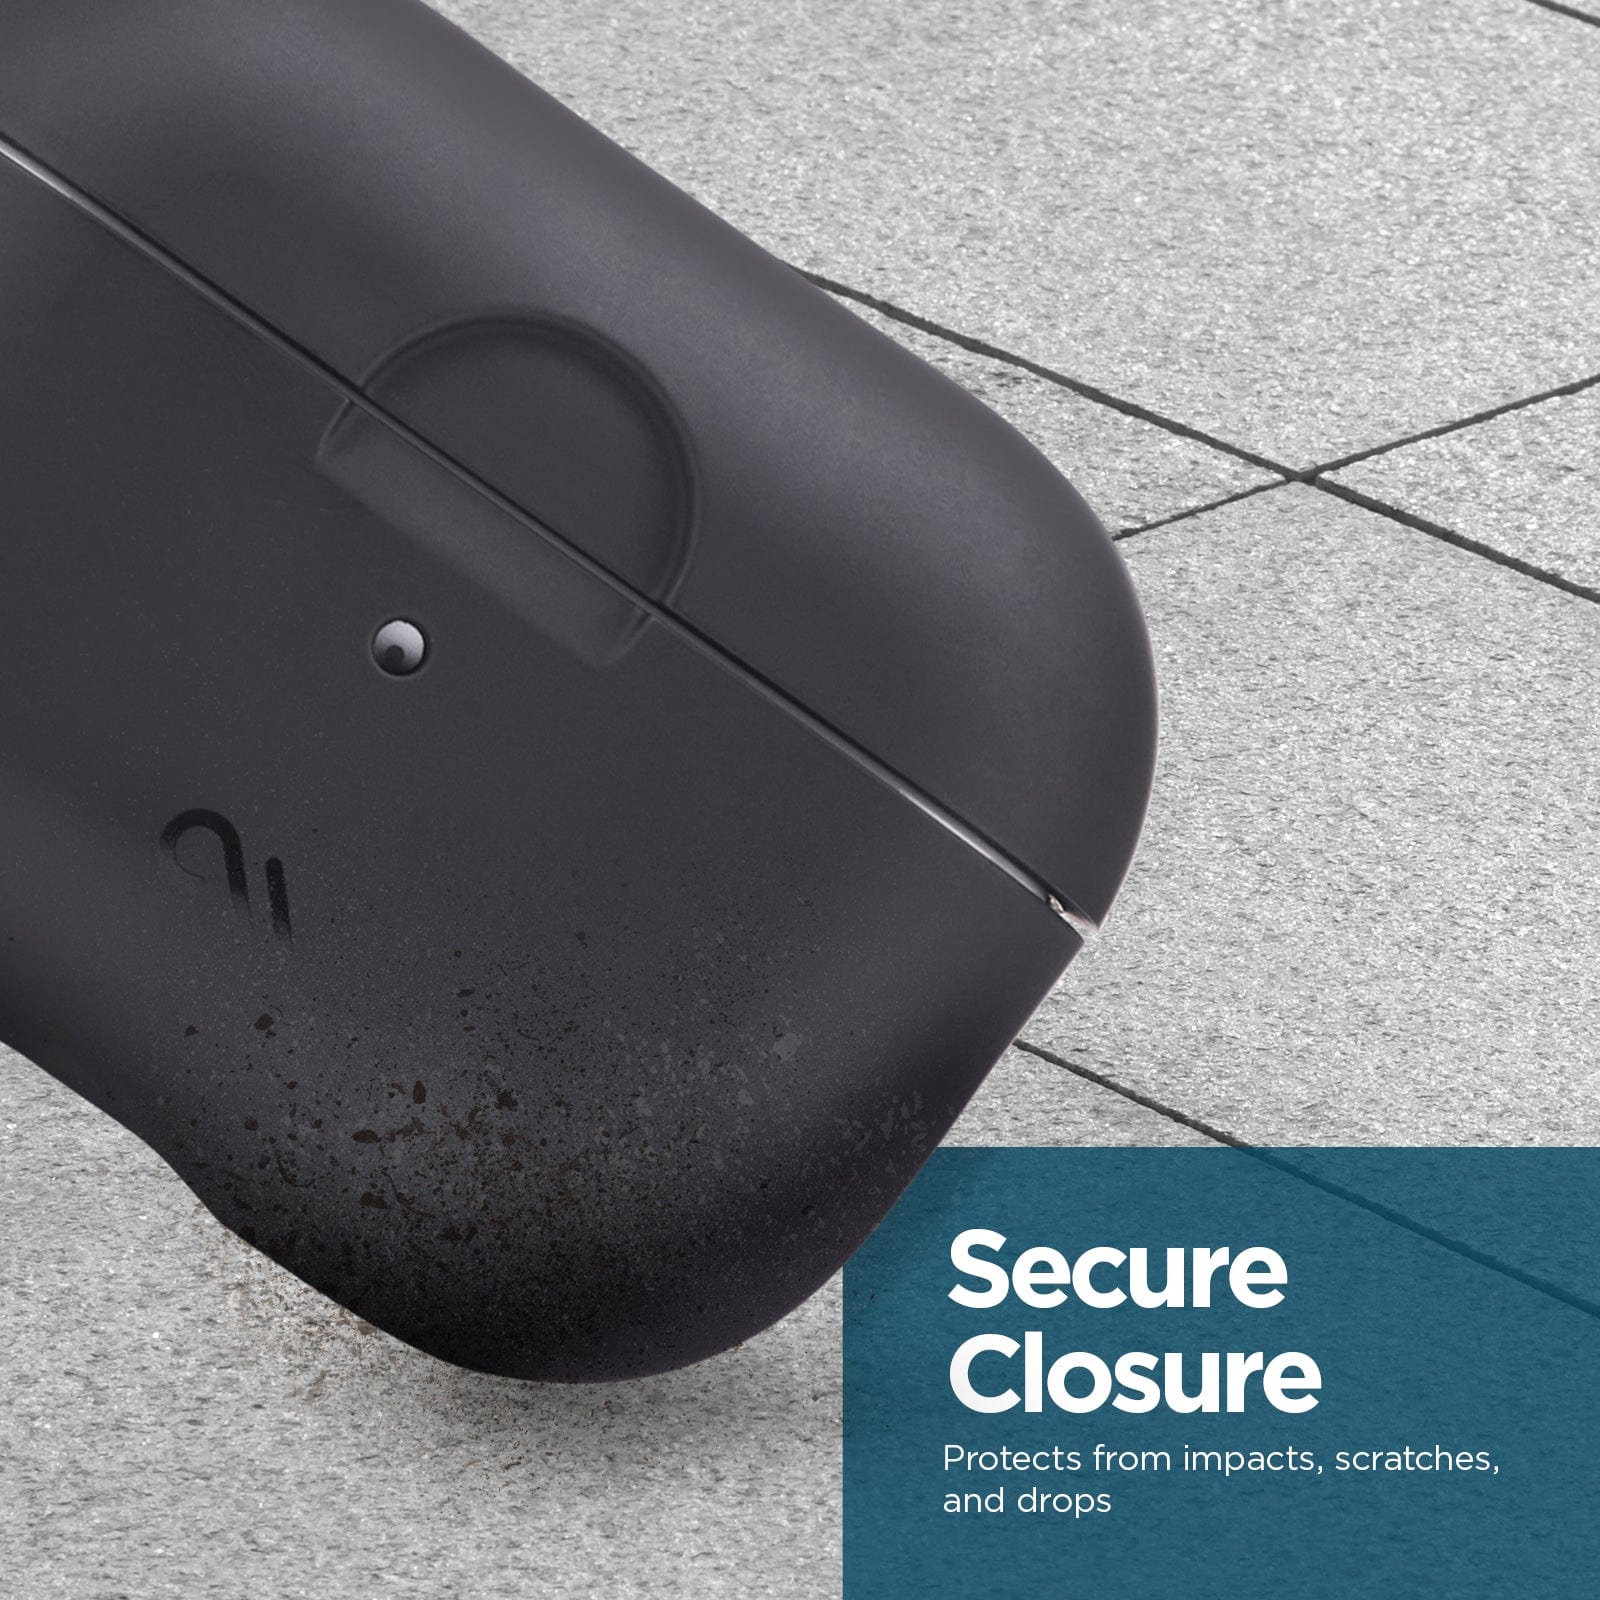 SECURE CLOSURE PROTECTS FROM IMPACTS, SCRATCHES, AND DROPS